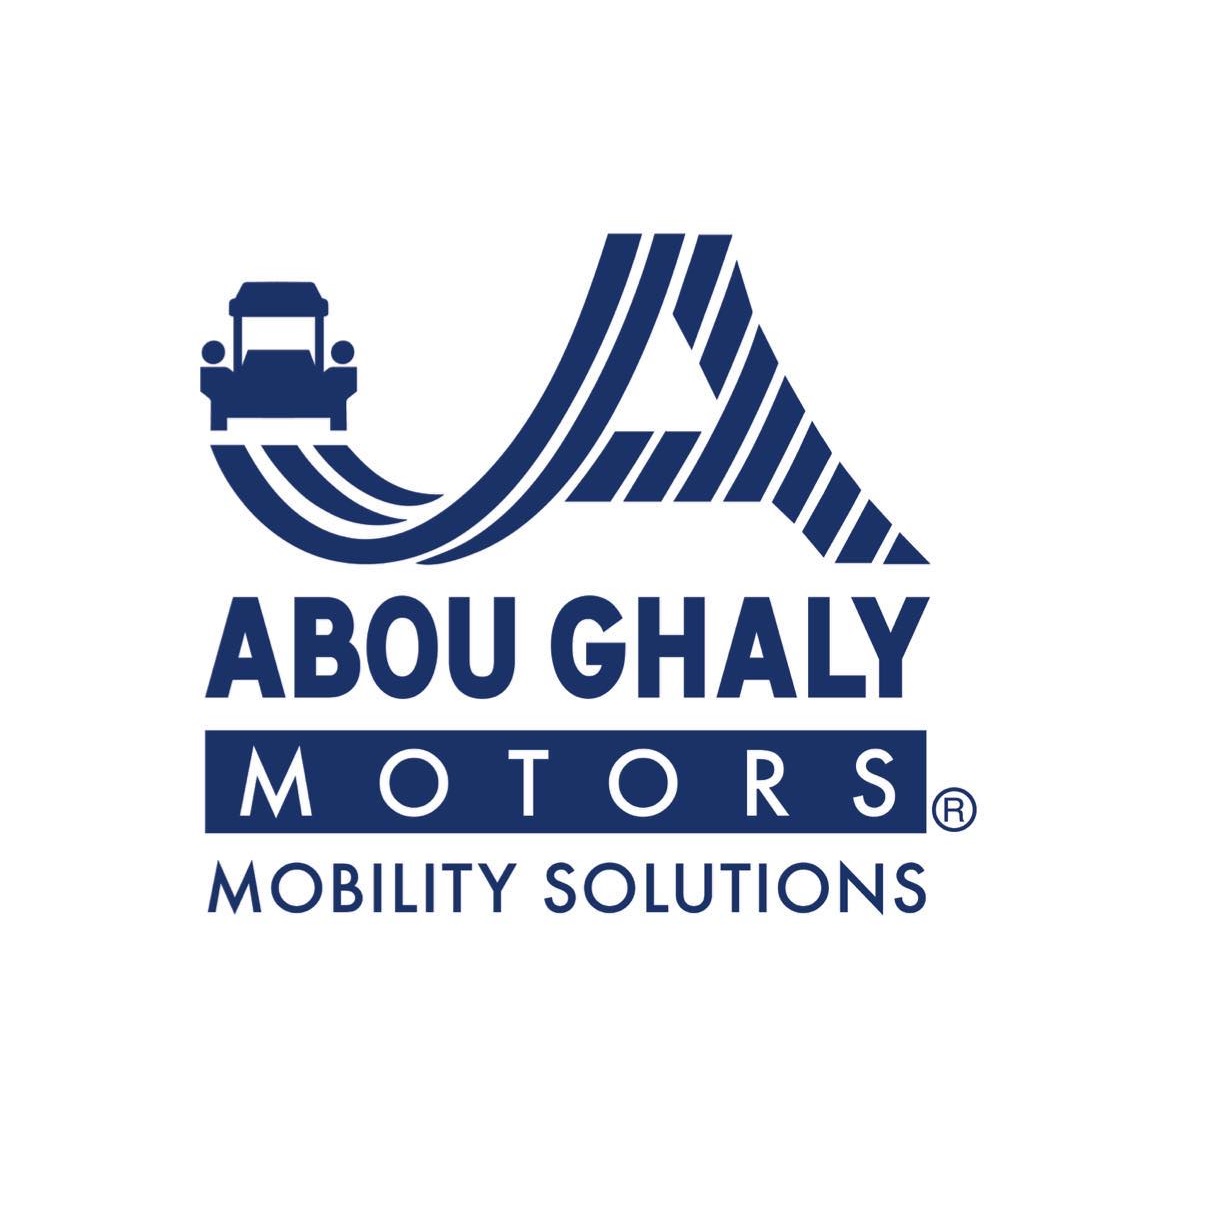 Abou Ghaly Motors